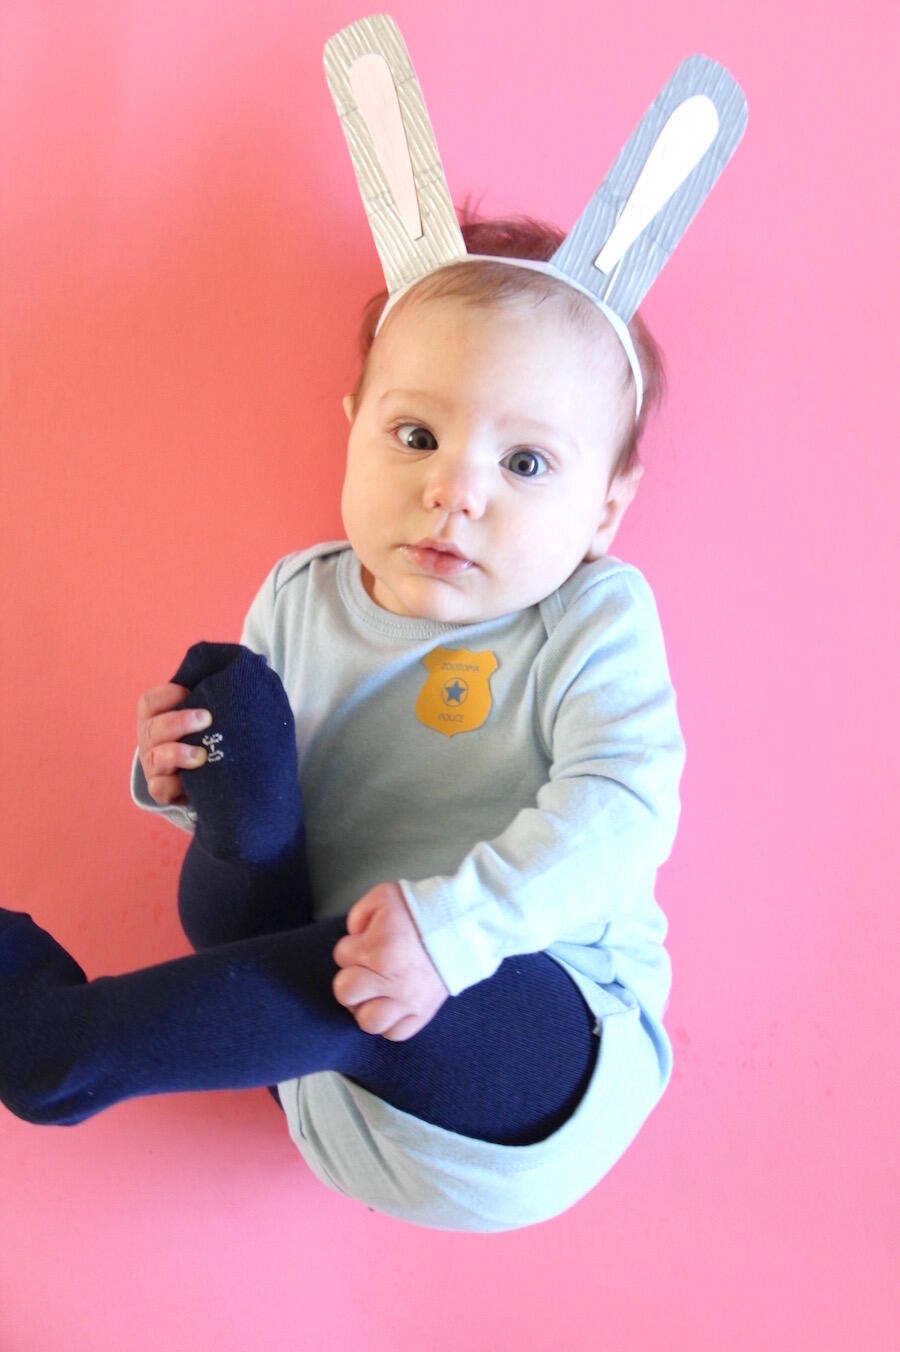 Make a Quick and Easy Judy Hopps Costume